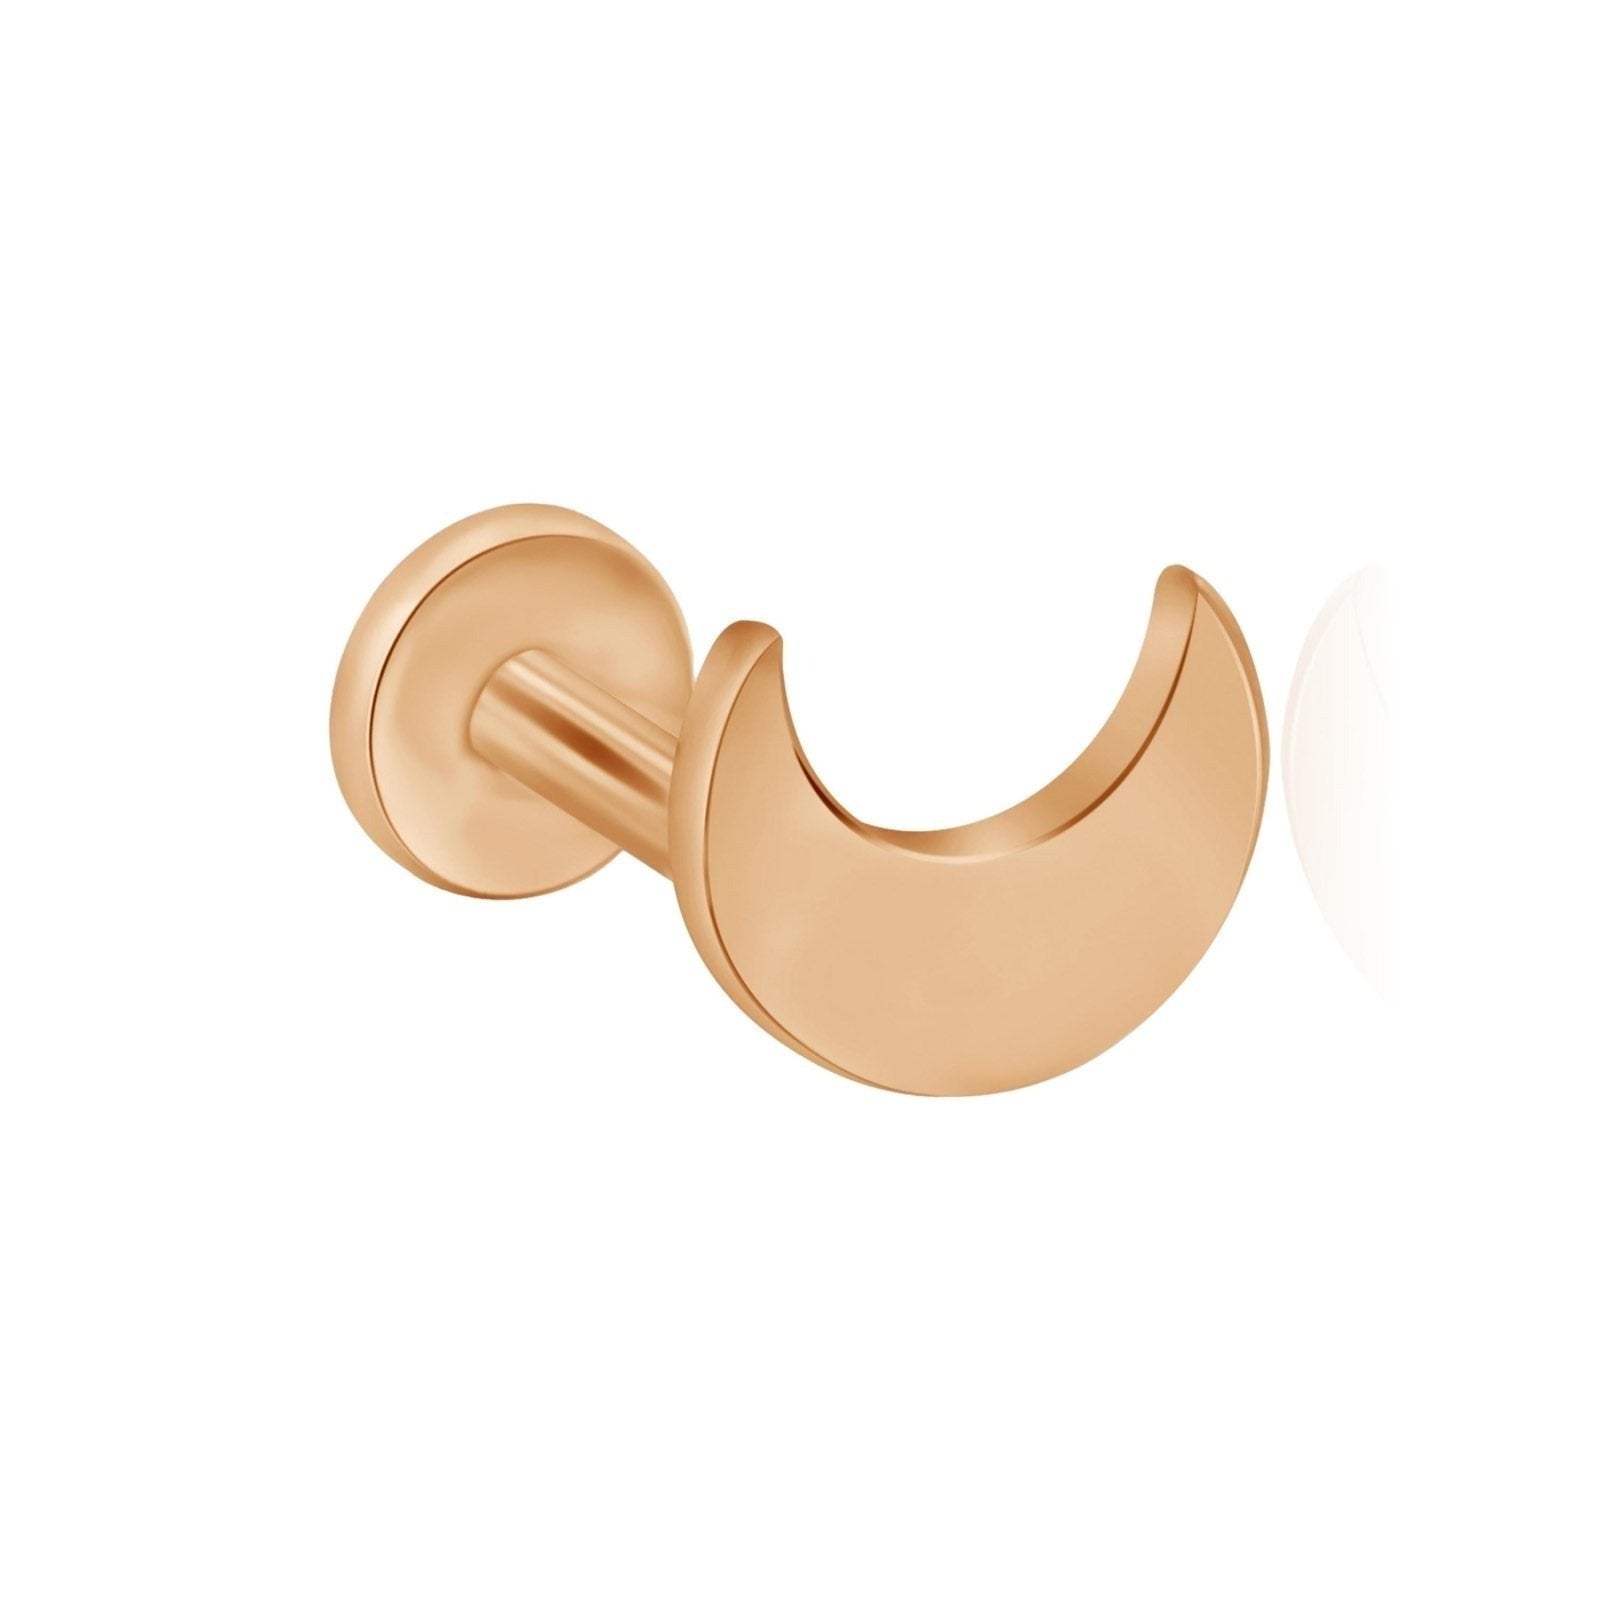 Crescent Moon Flat Back Stud Earring Earrings Estella Collection #product_description# 18485 14k Cartilage Earring Cartilage Earrings #tag4# #tag5# #tag6# #tag7# #tag8# #tag9# #tag10# 5MM